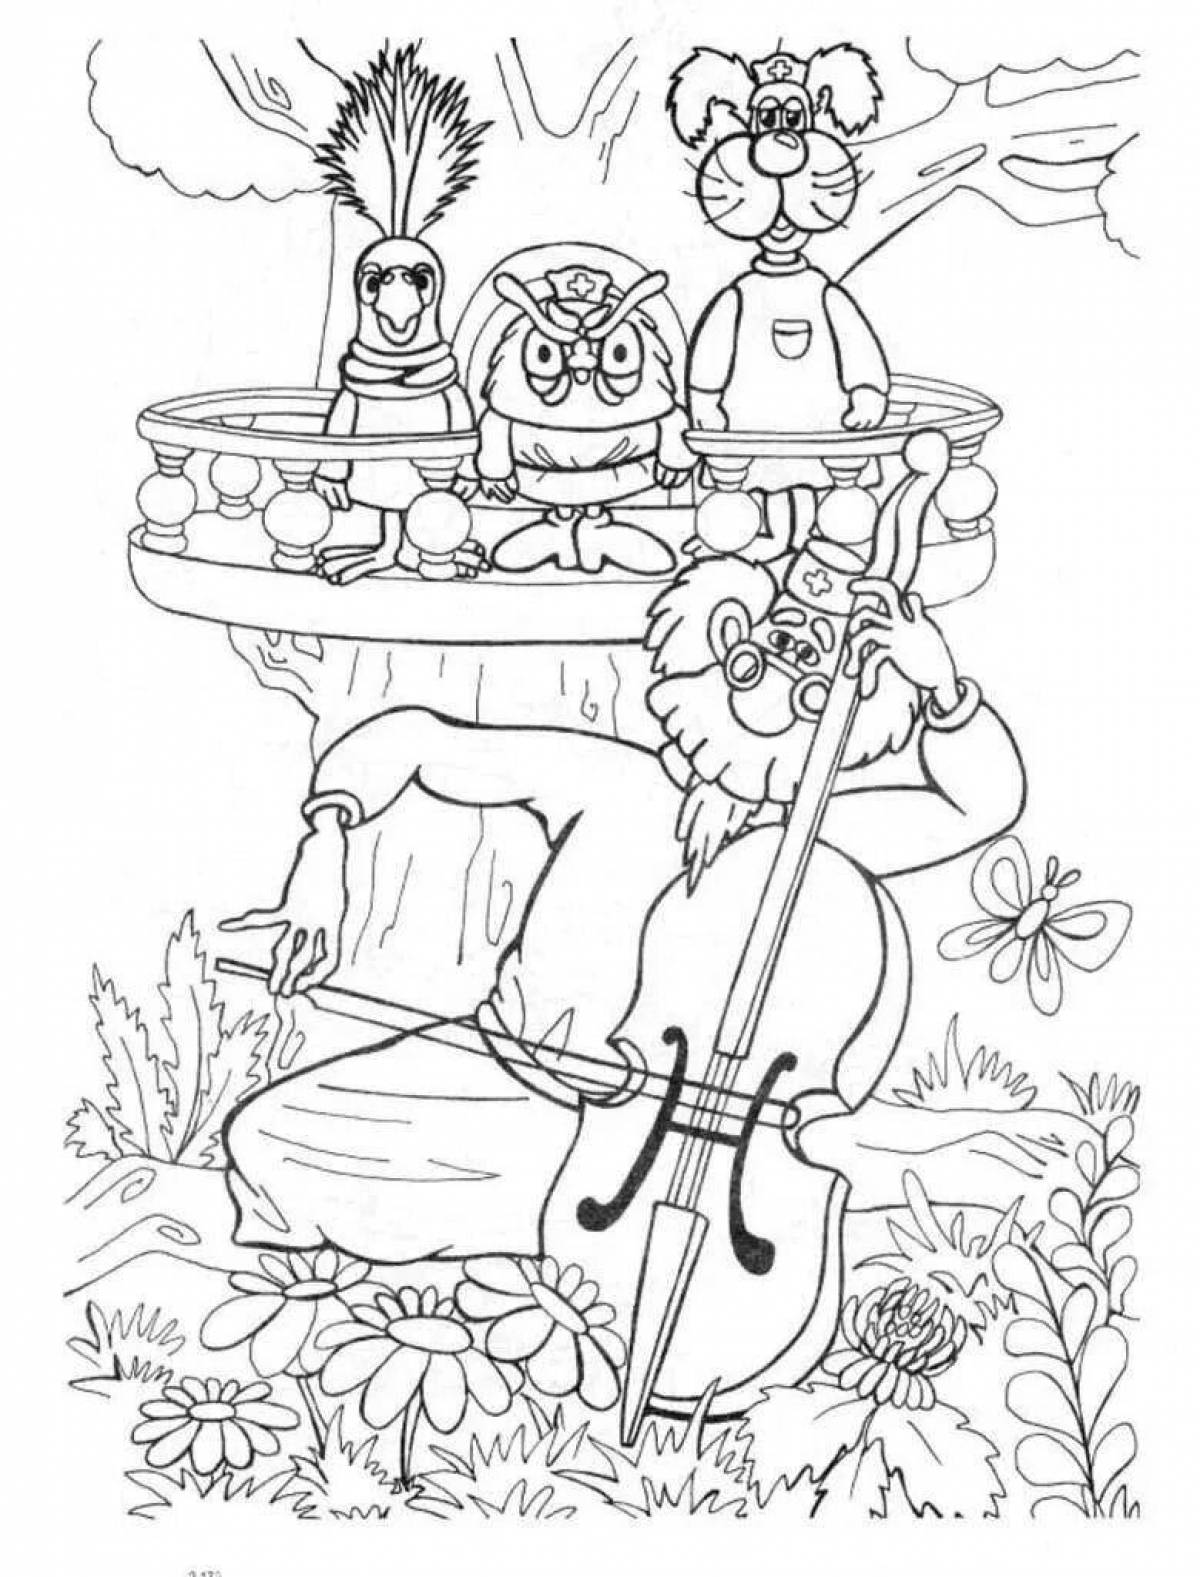 Fun coloring book based on the fairy tales of Korney Chukovsky